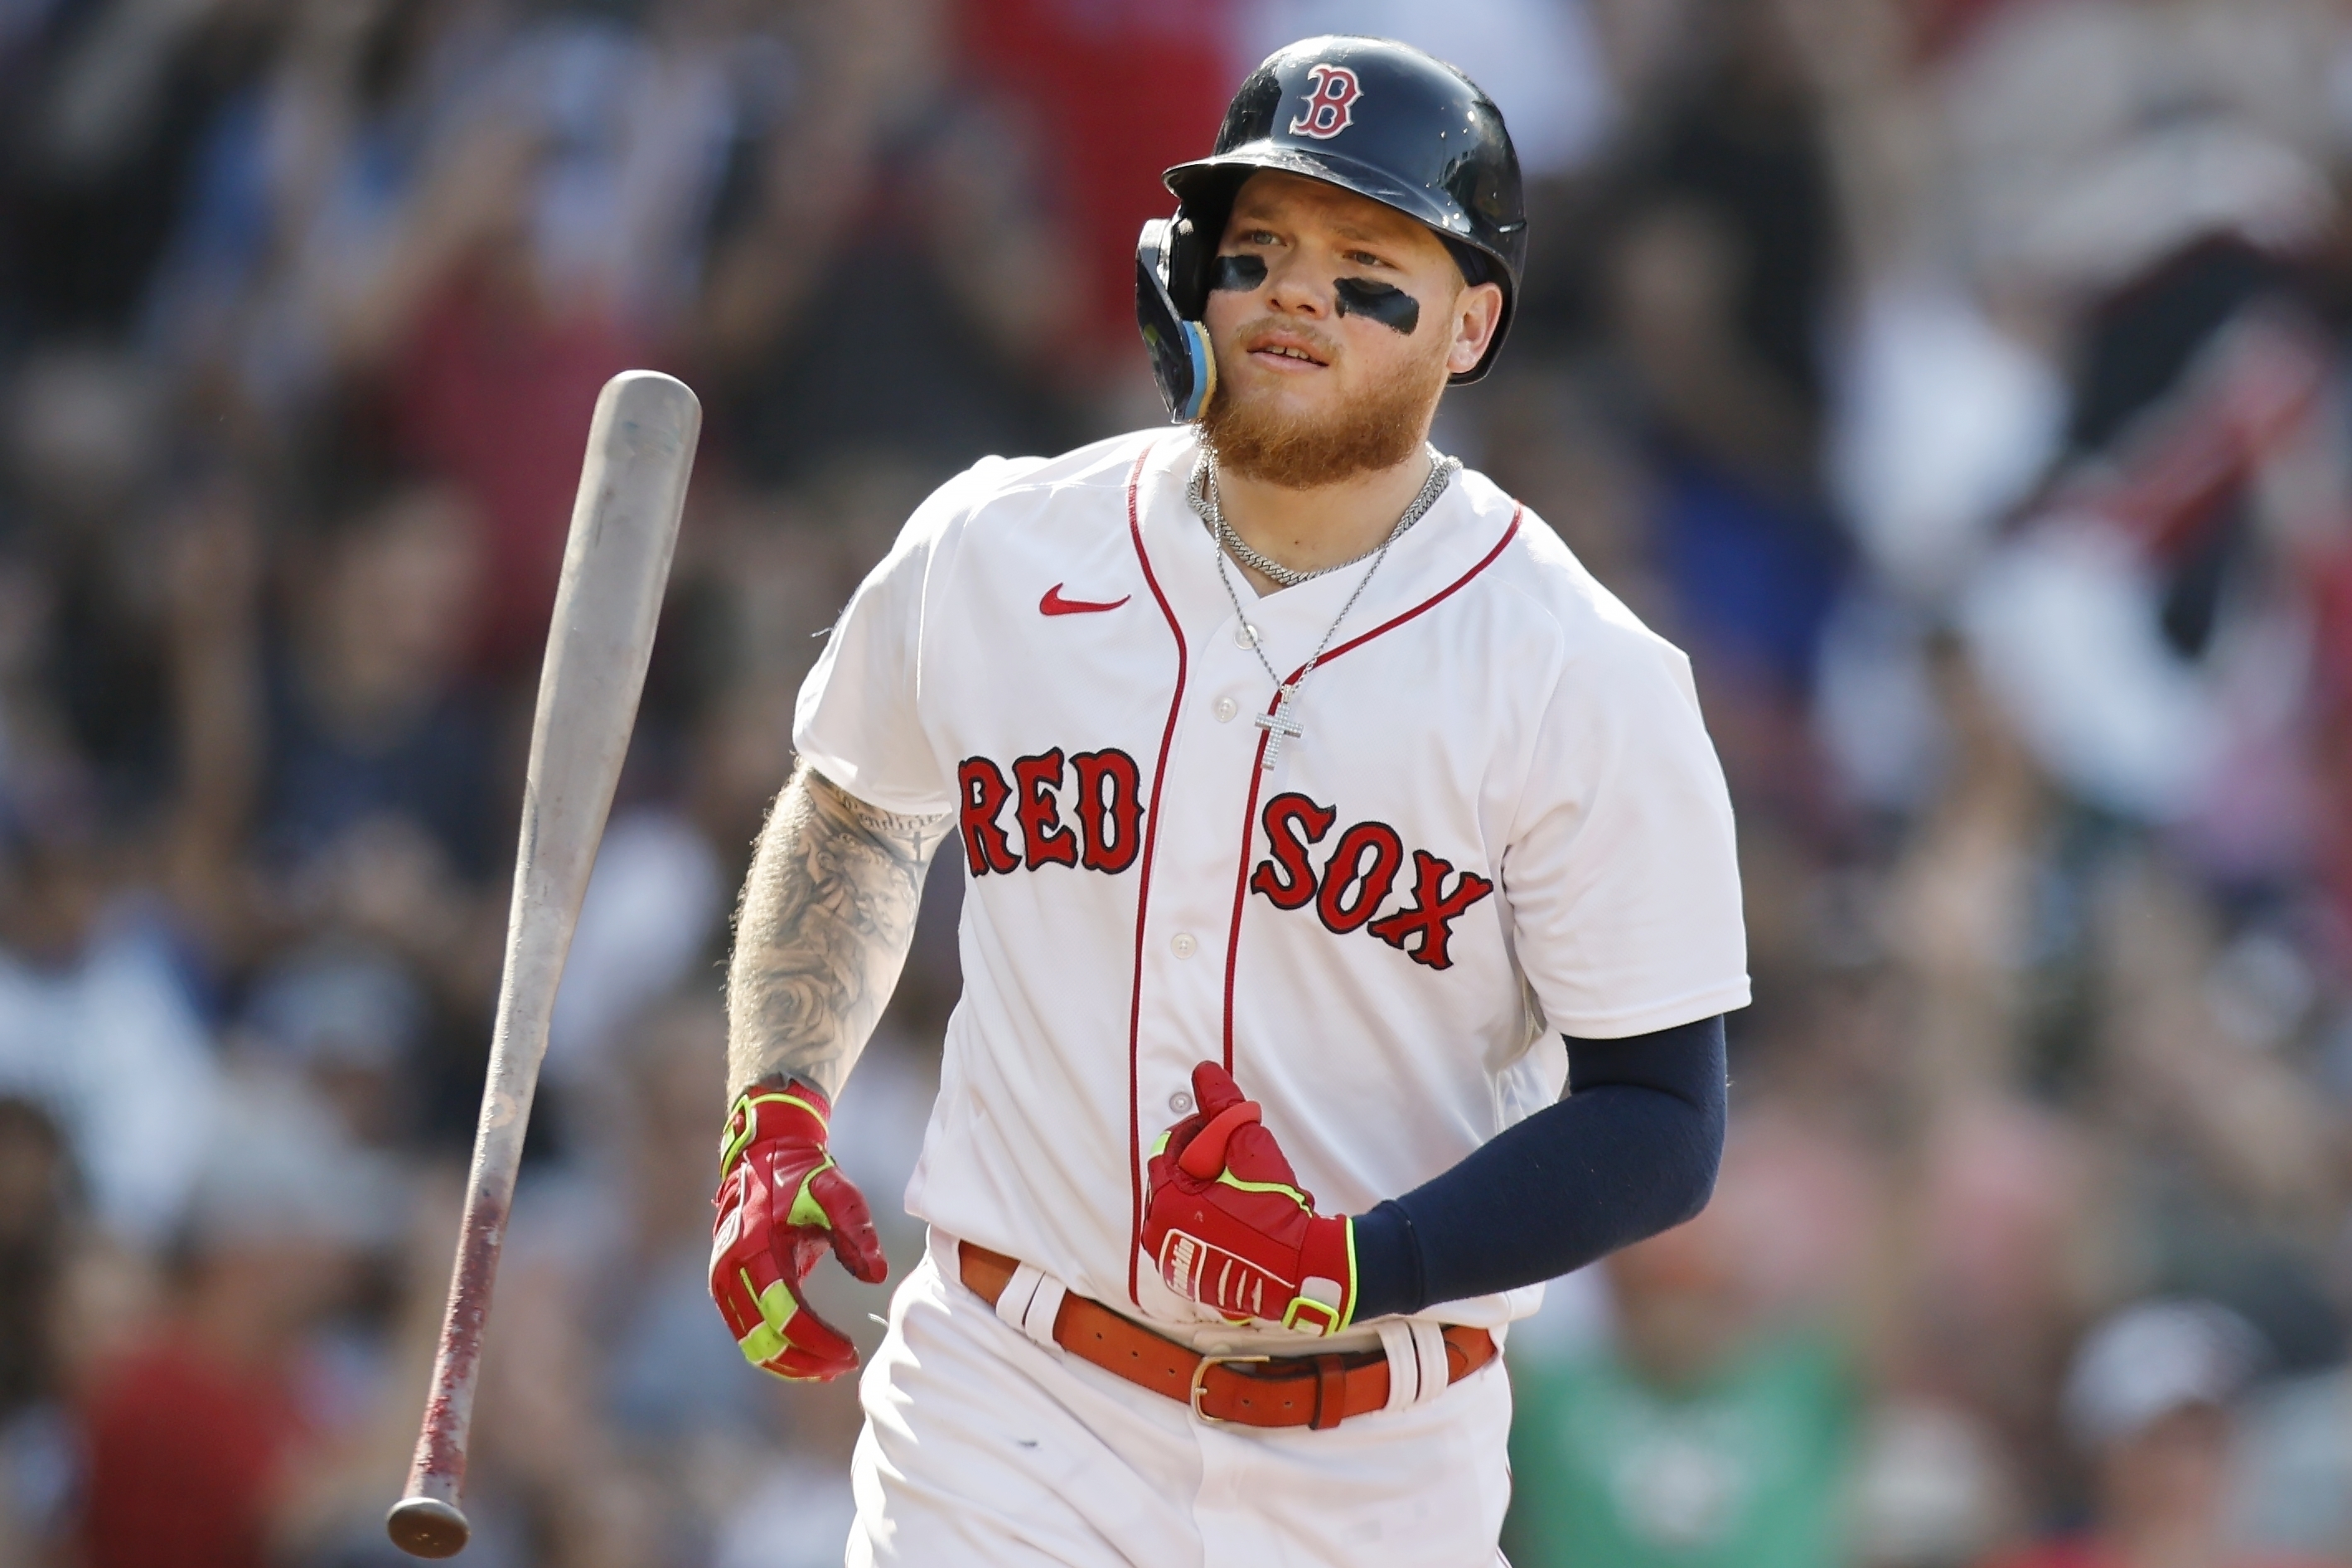 Veteran Red Sox outfielder and reliever trigger opt-outs